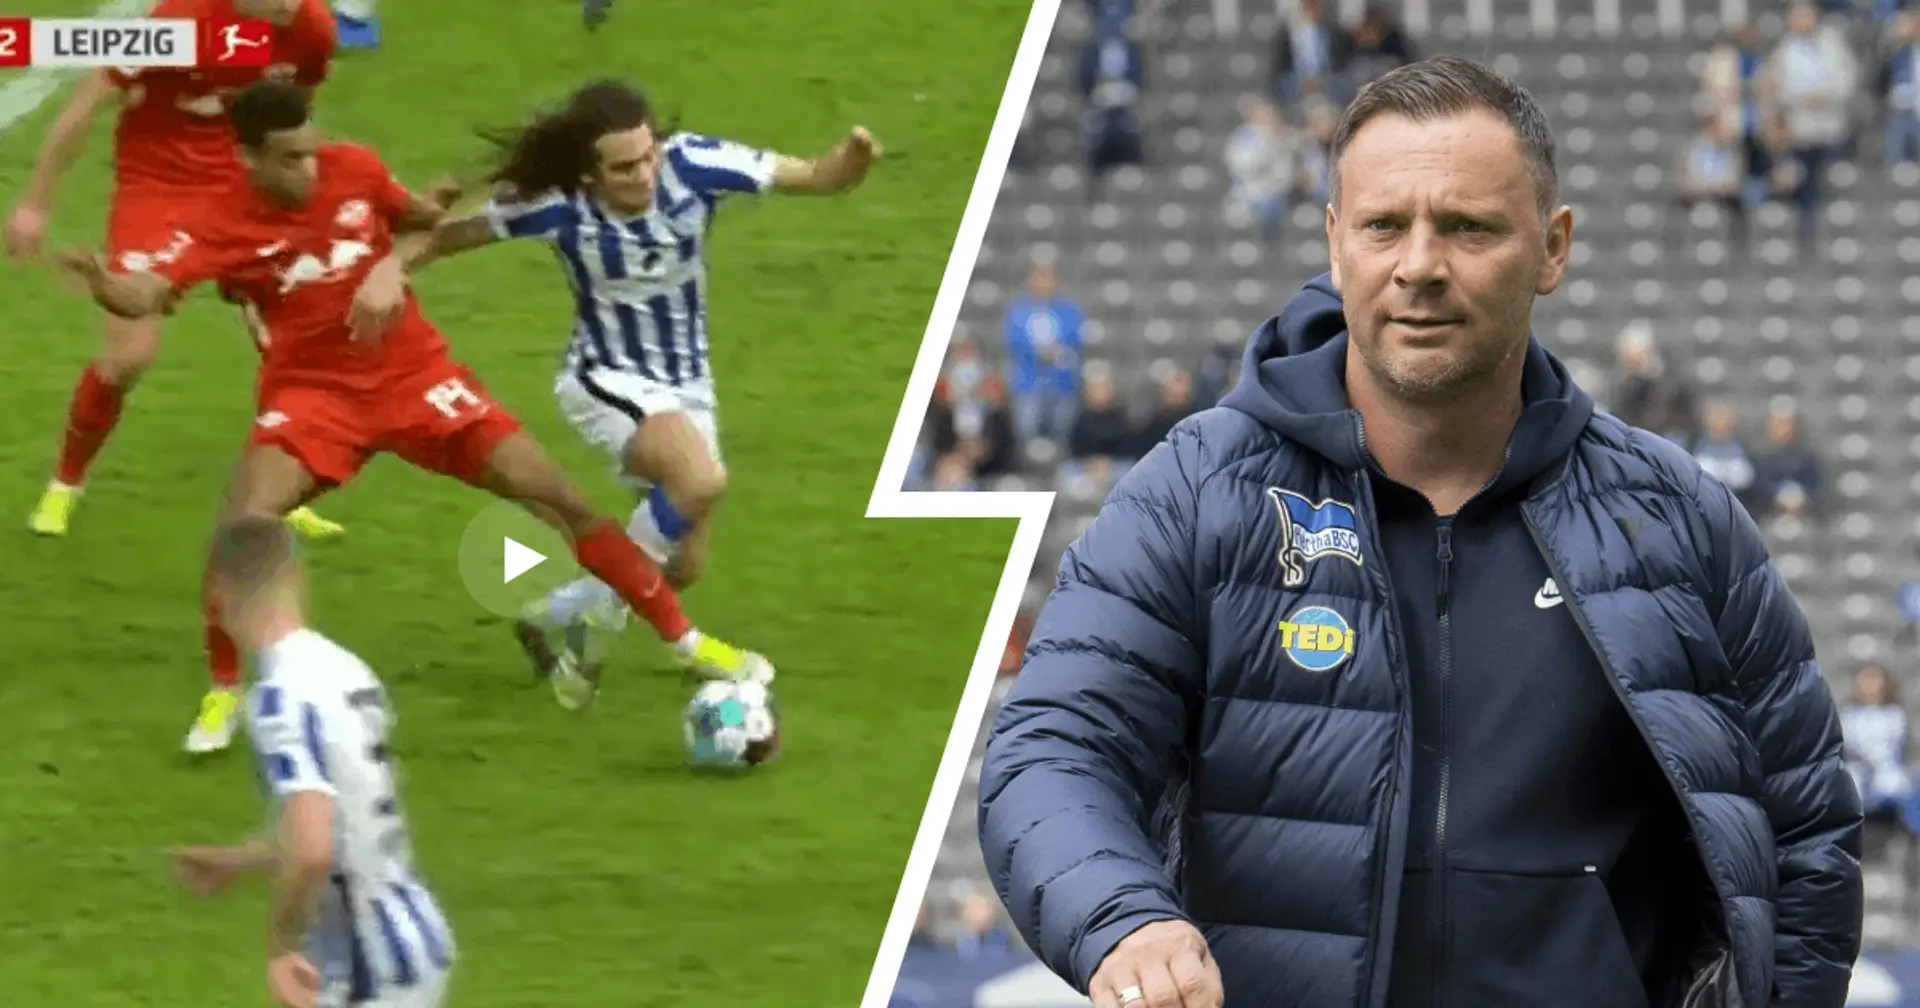 'It's like puberty for him ... he has to learn like an animal': Hertha boss sends warning to 'rebel' Guendouzi after costly mistake